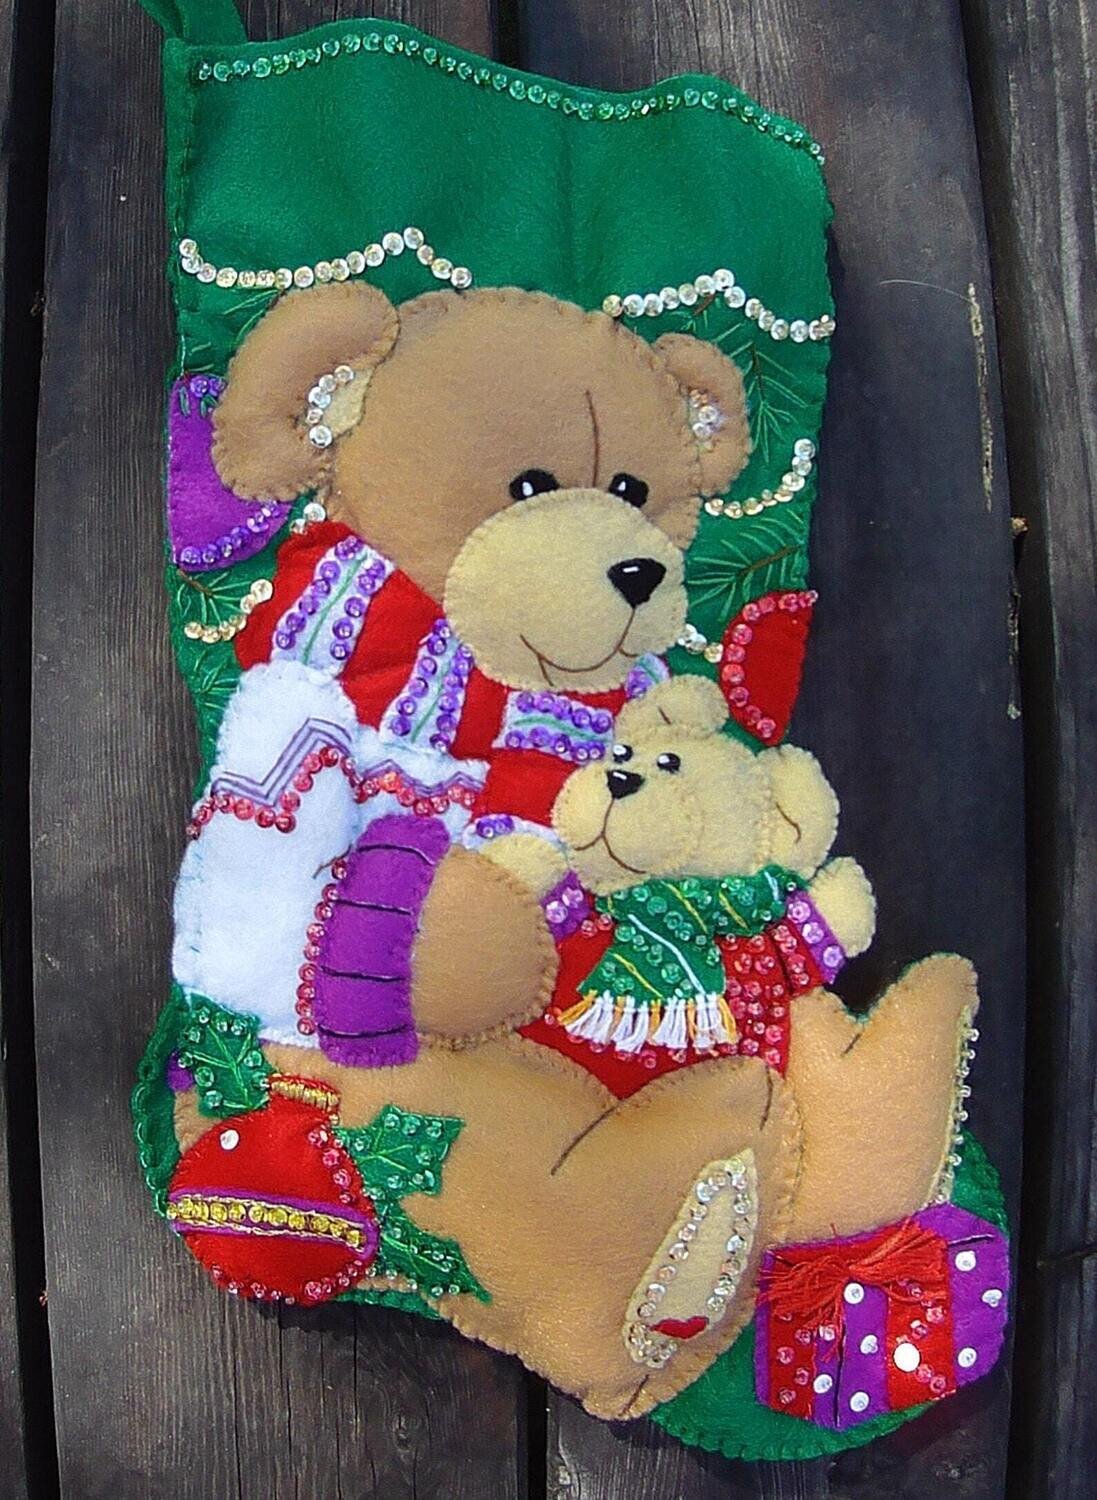 Finished Christmas Stocking  TEDDY BEAR Dimensions Feltworks From Kit 8115 Baby Bear Gifts Presents Sweater Applique Felt Completed!